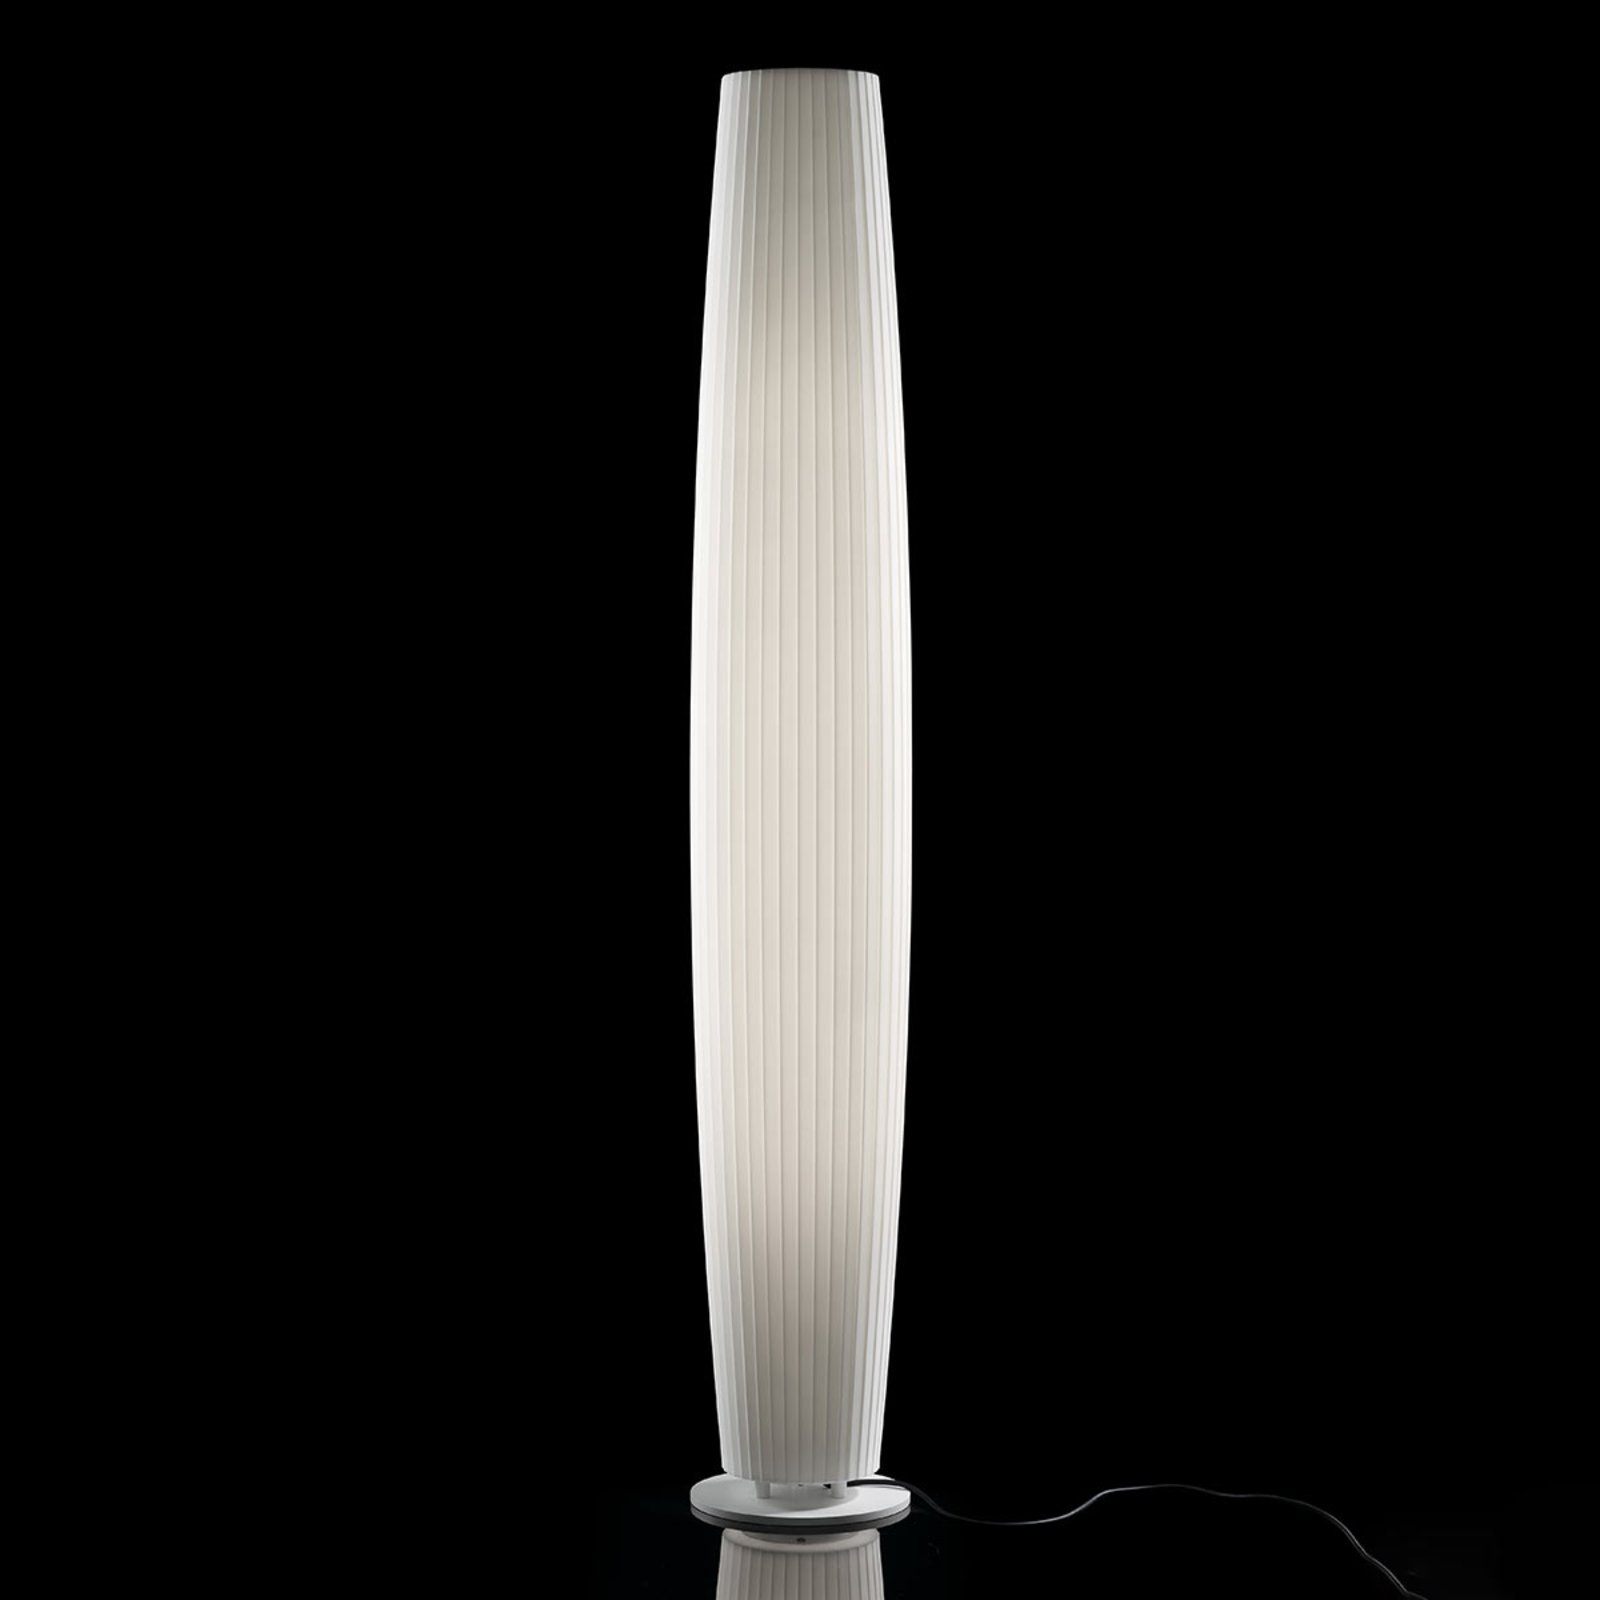 Bover Maxi P/180 LED outdoor floor lamp